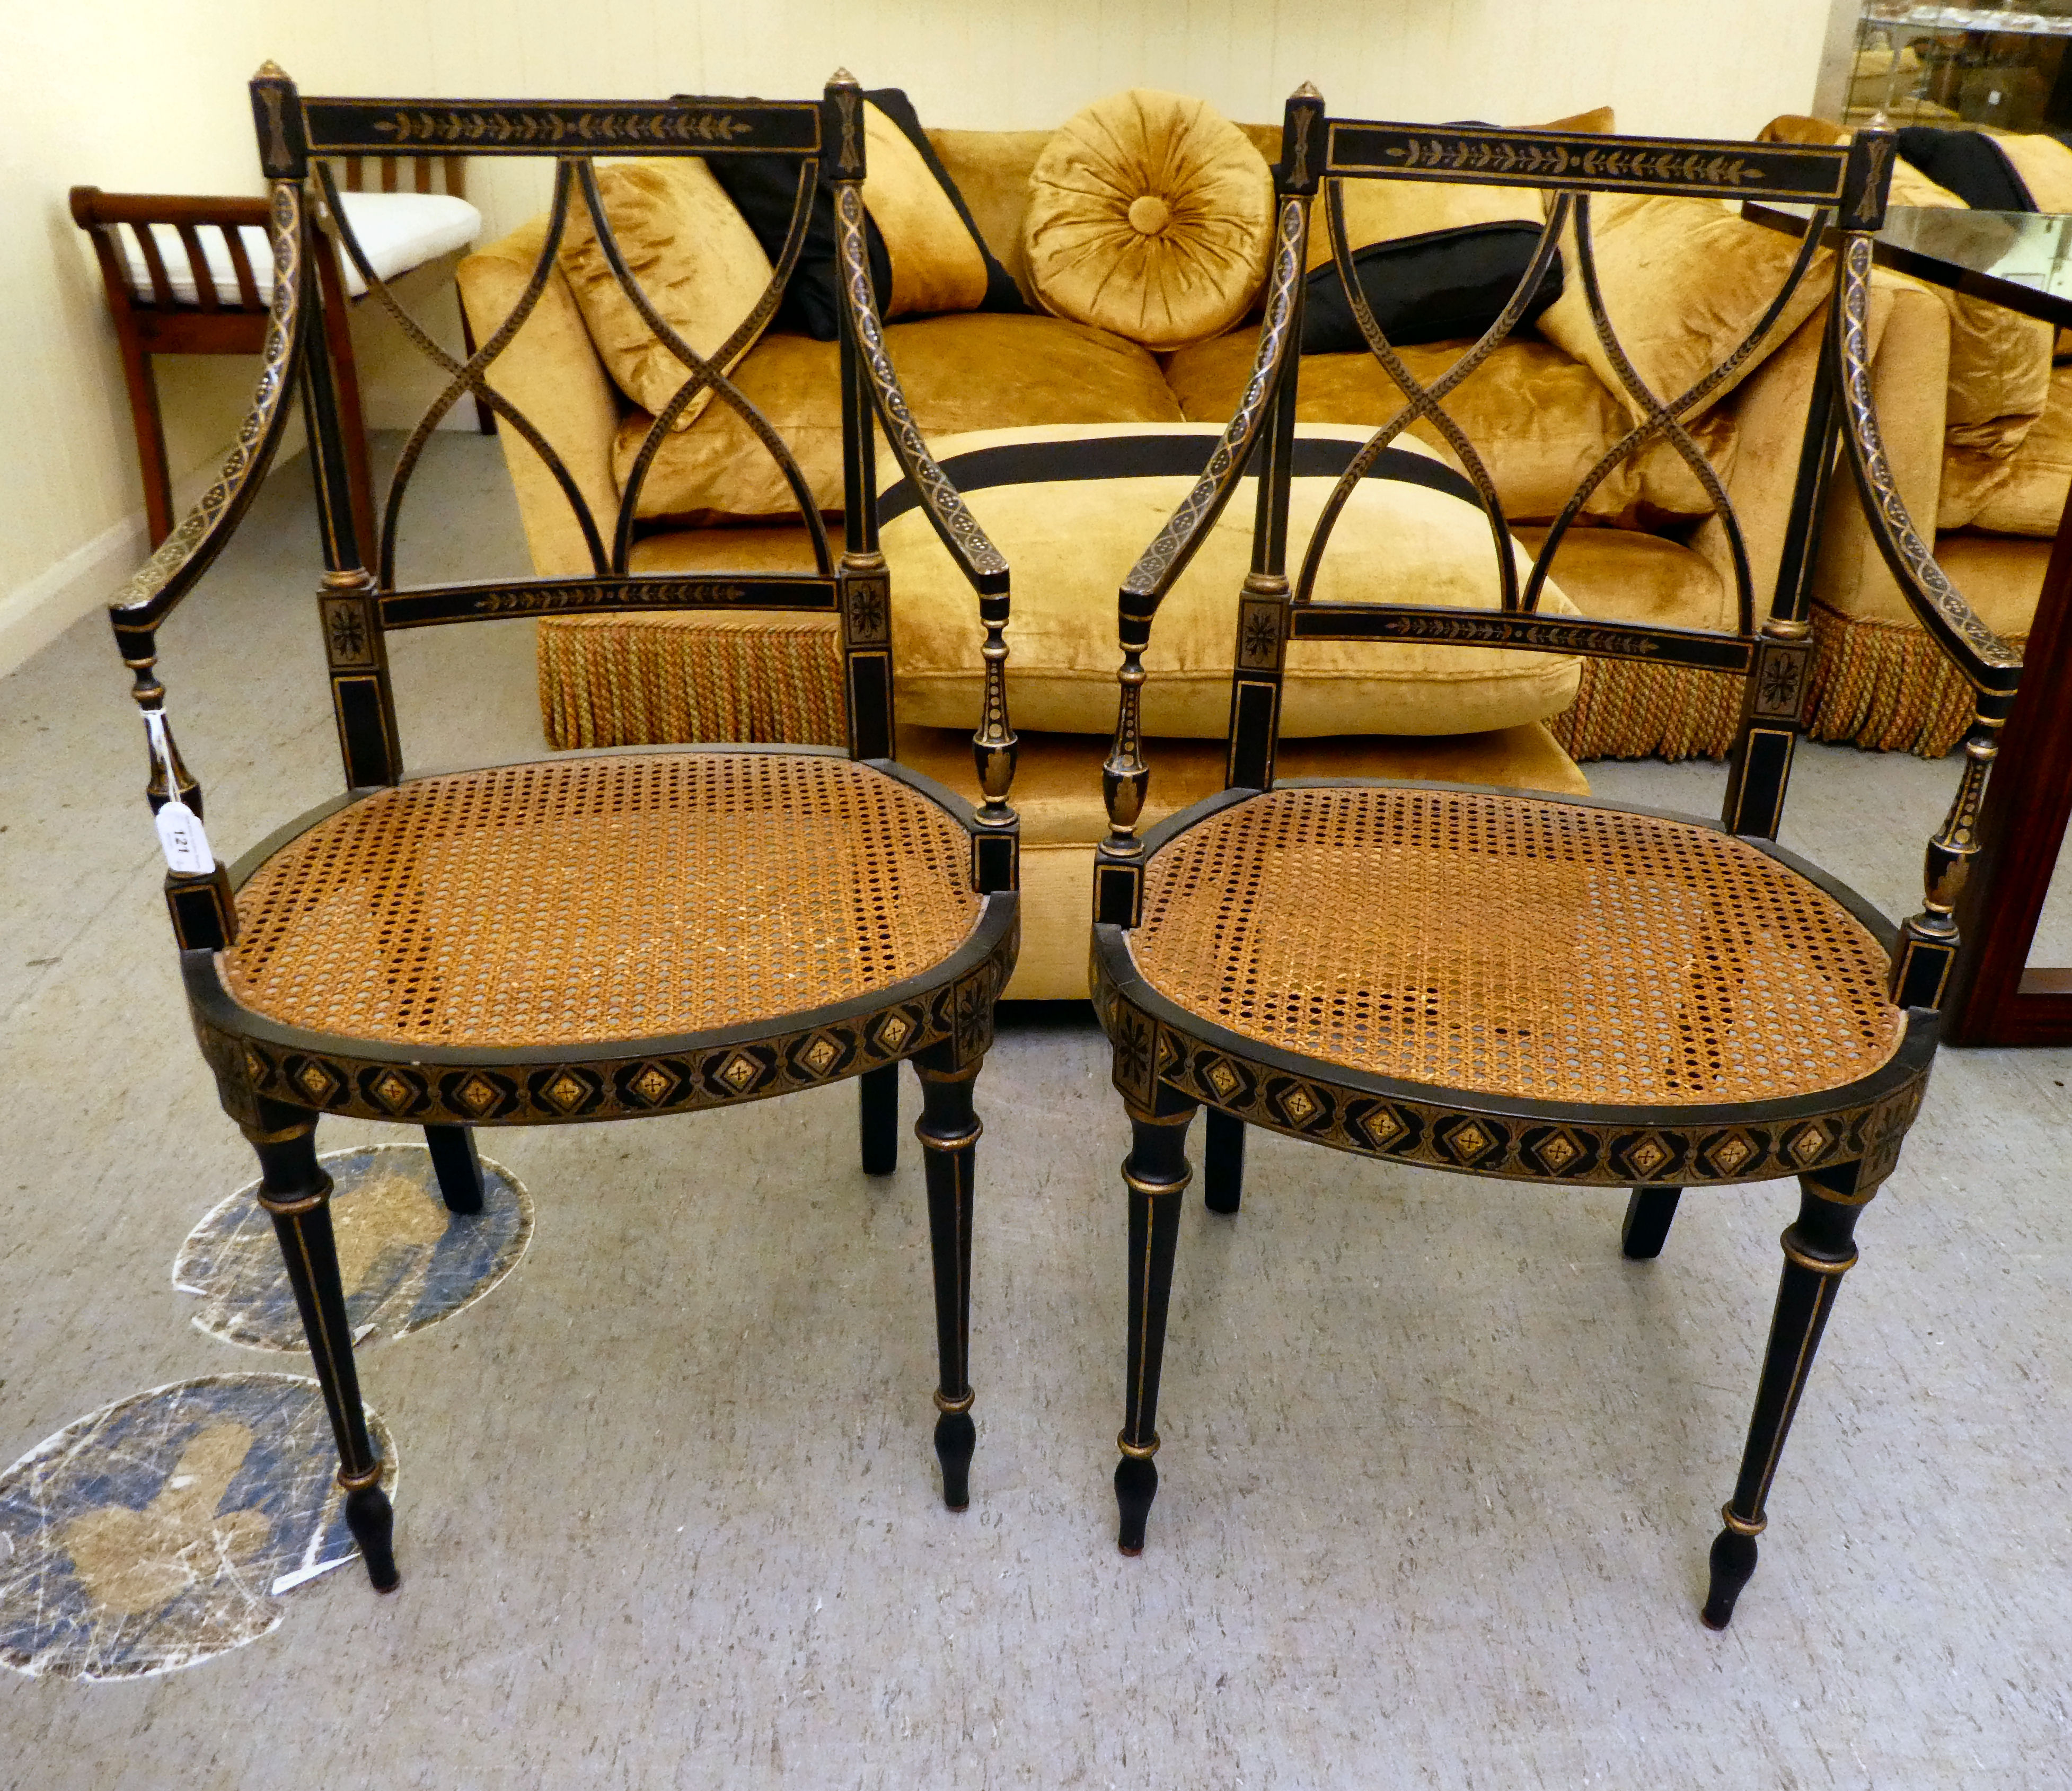 A pair of early 19thC style black painted and gilded beech framed chairs, each having a curved